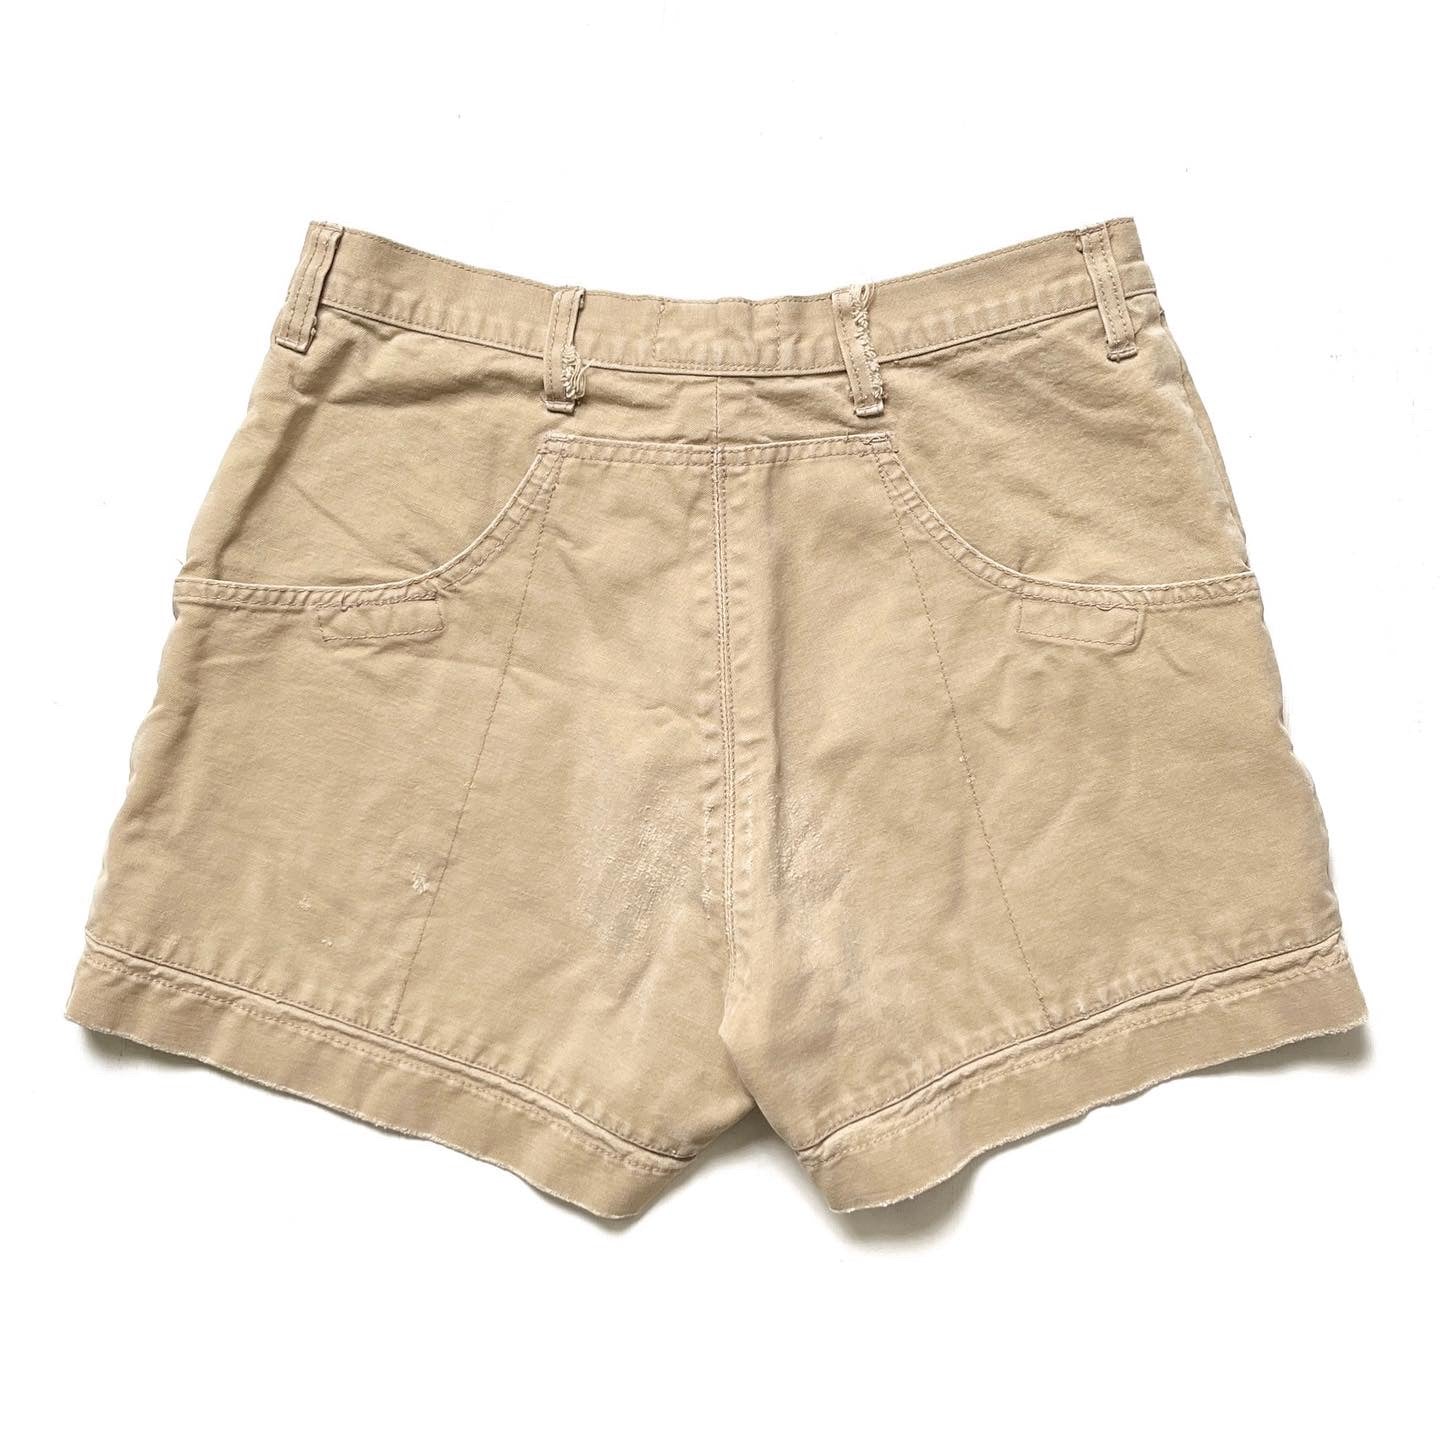 1970s Patagonia ‘Chouinard Equipment’ Stand Up Shorts (34)